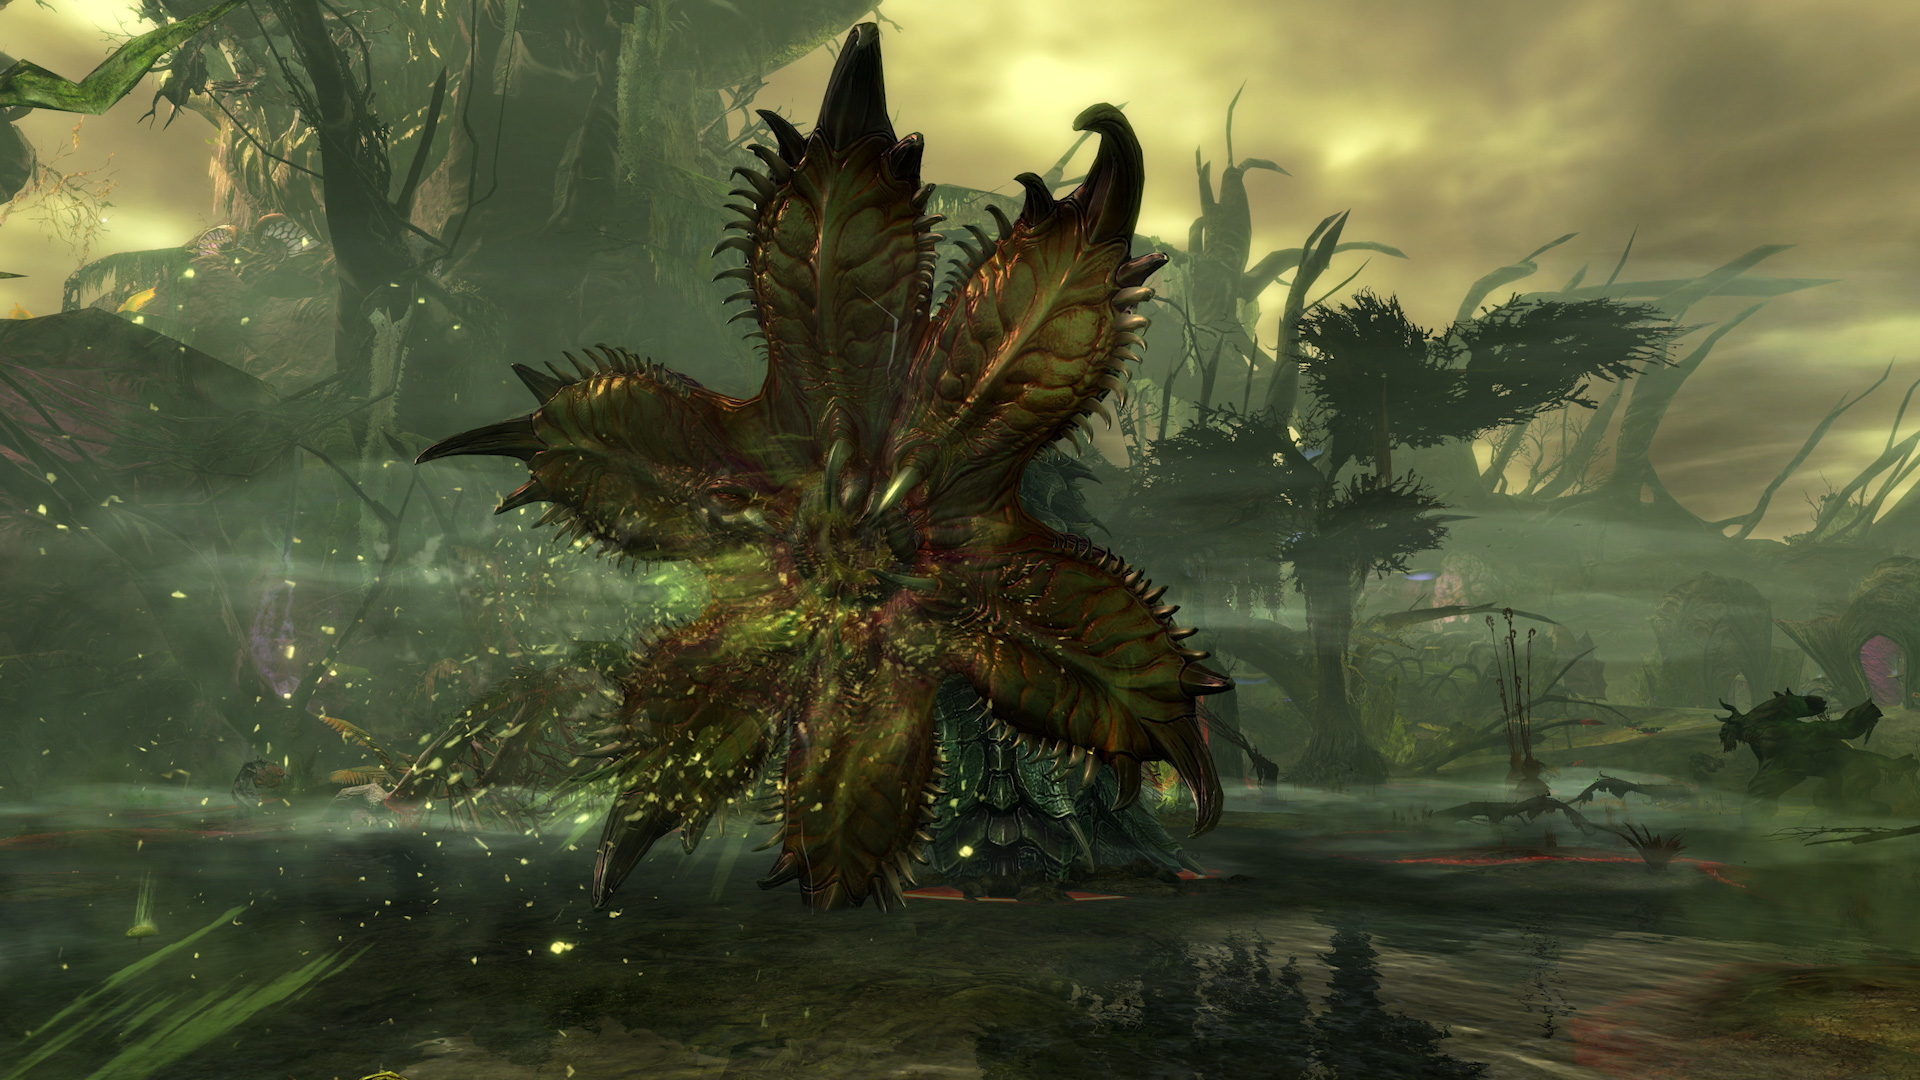 tidsskrift regional Vittig Guild Wars 2 on Twitter: "6 days left until #TenYearsOfGW2! Today's  giveaway is 6 World Boss Portal Devices! To enter, please tweet a  screenshot of your favorite #GuildWars2 World Boss tagged #TenYearsOfGW2